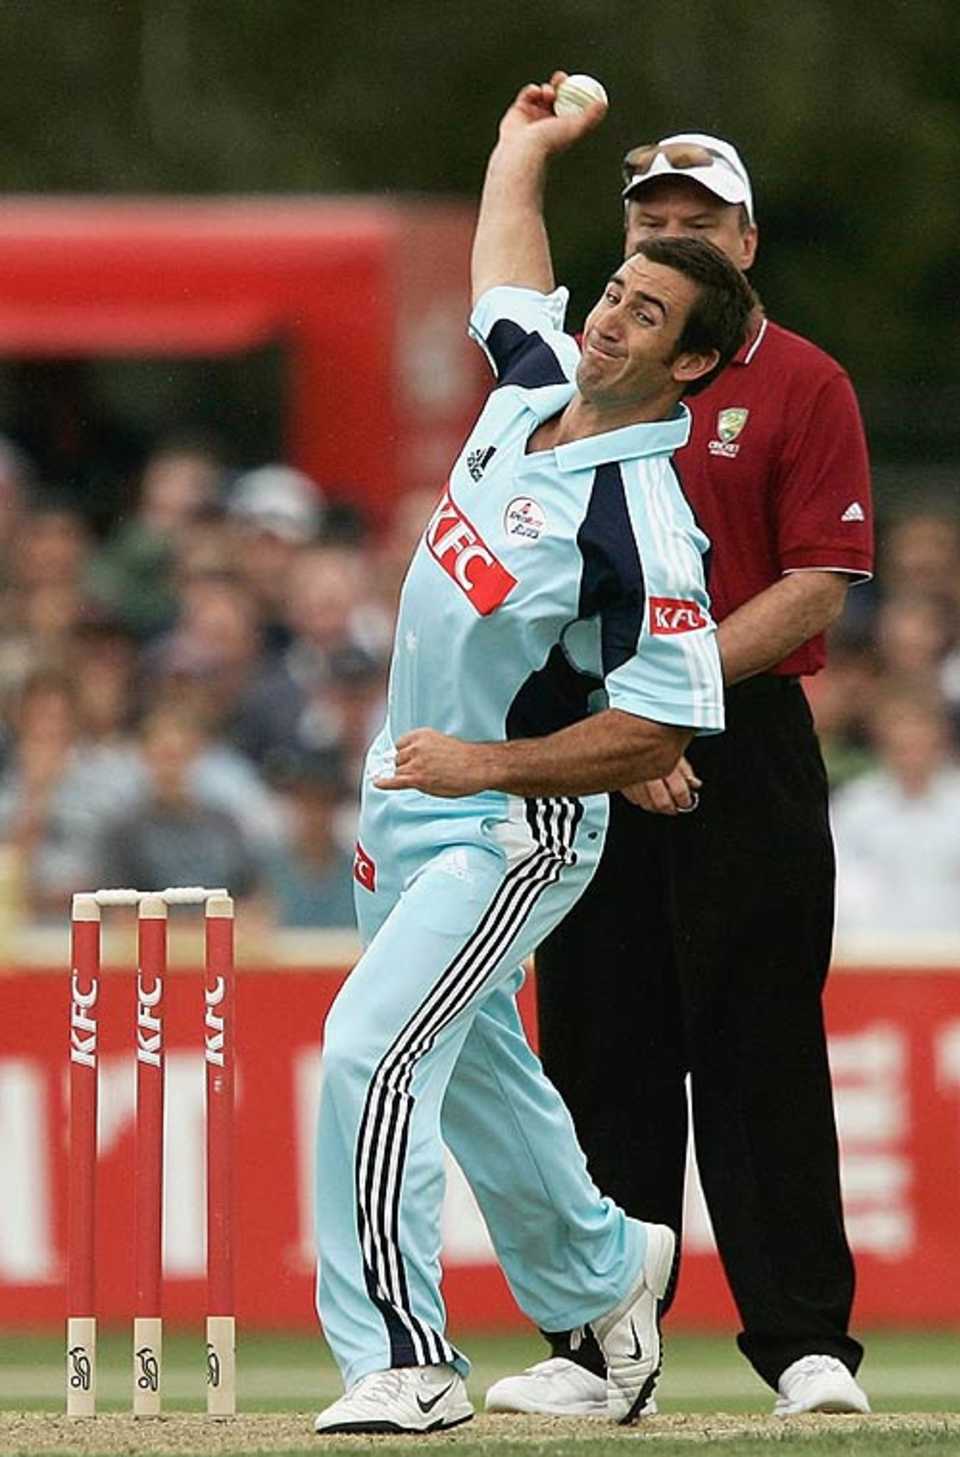 Andrew Johns, the rugby league star, is entrusted to bowl an over late in the innings, New South Wales v South Australia, KFC Twenty20, Newcastle, January 7, 2007